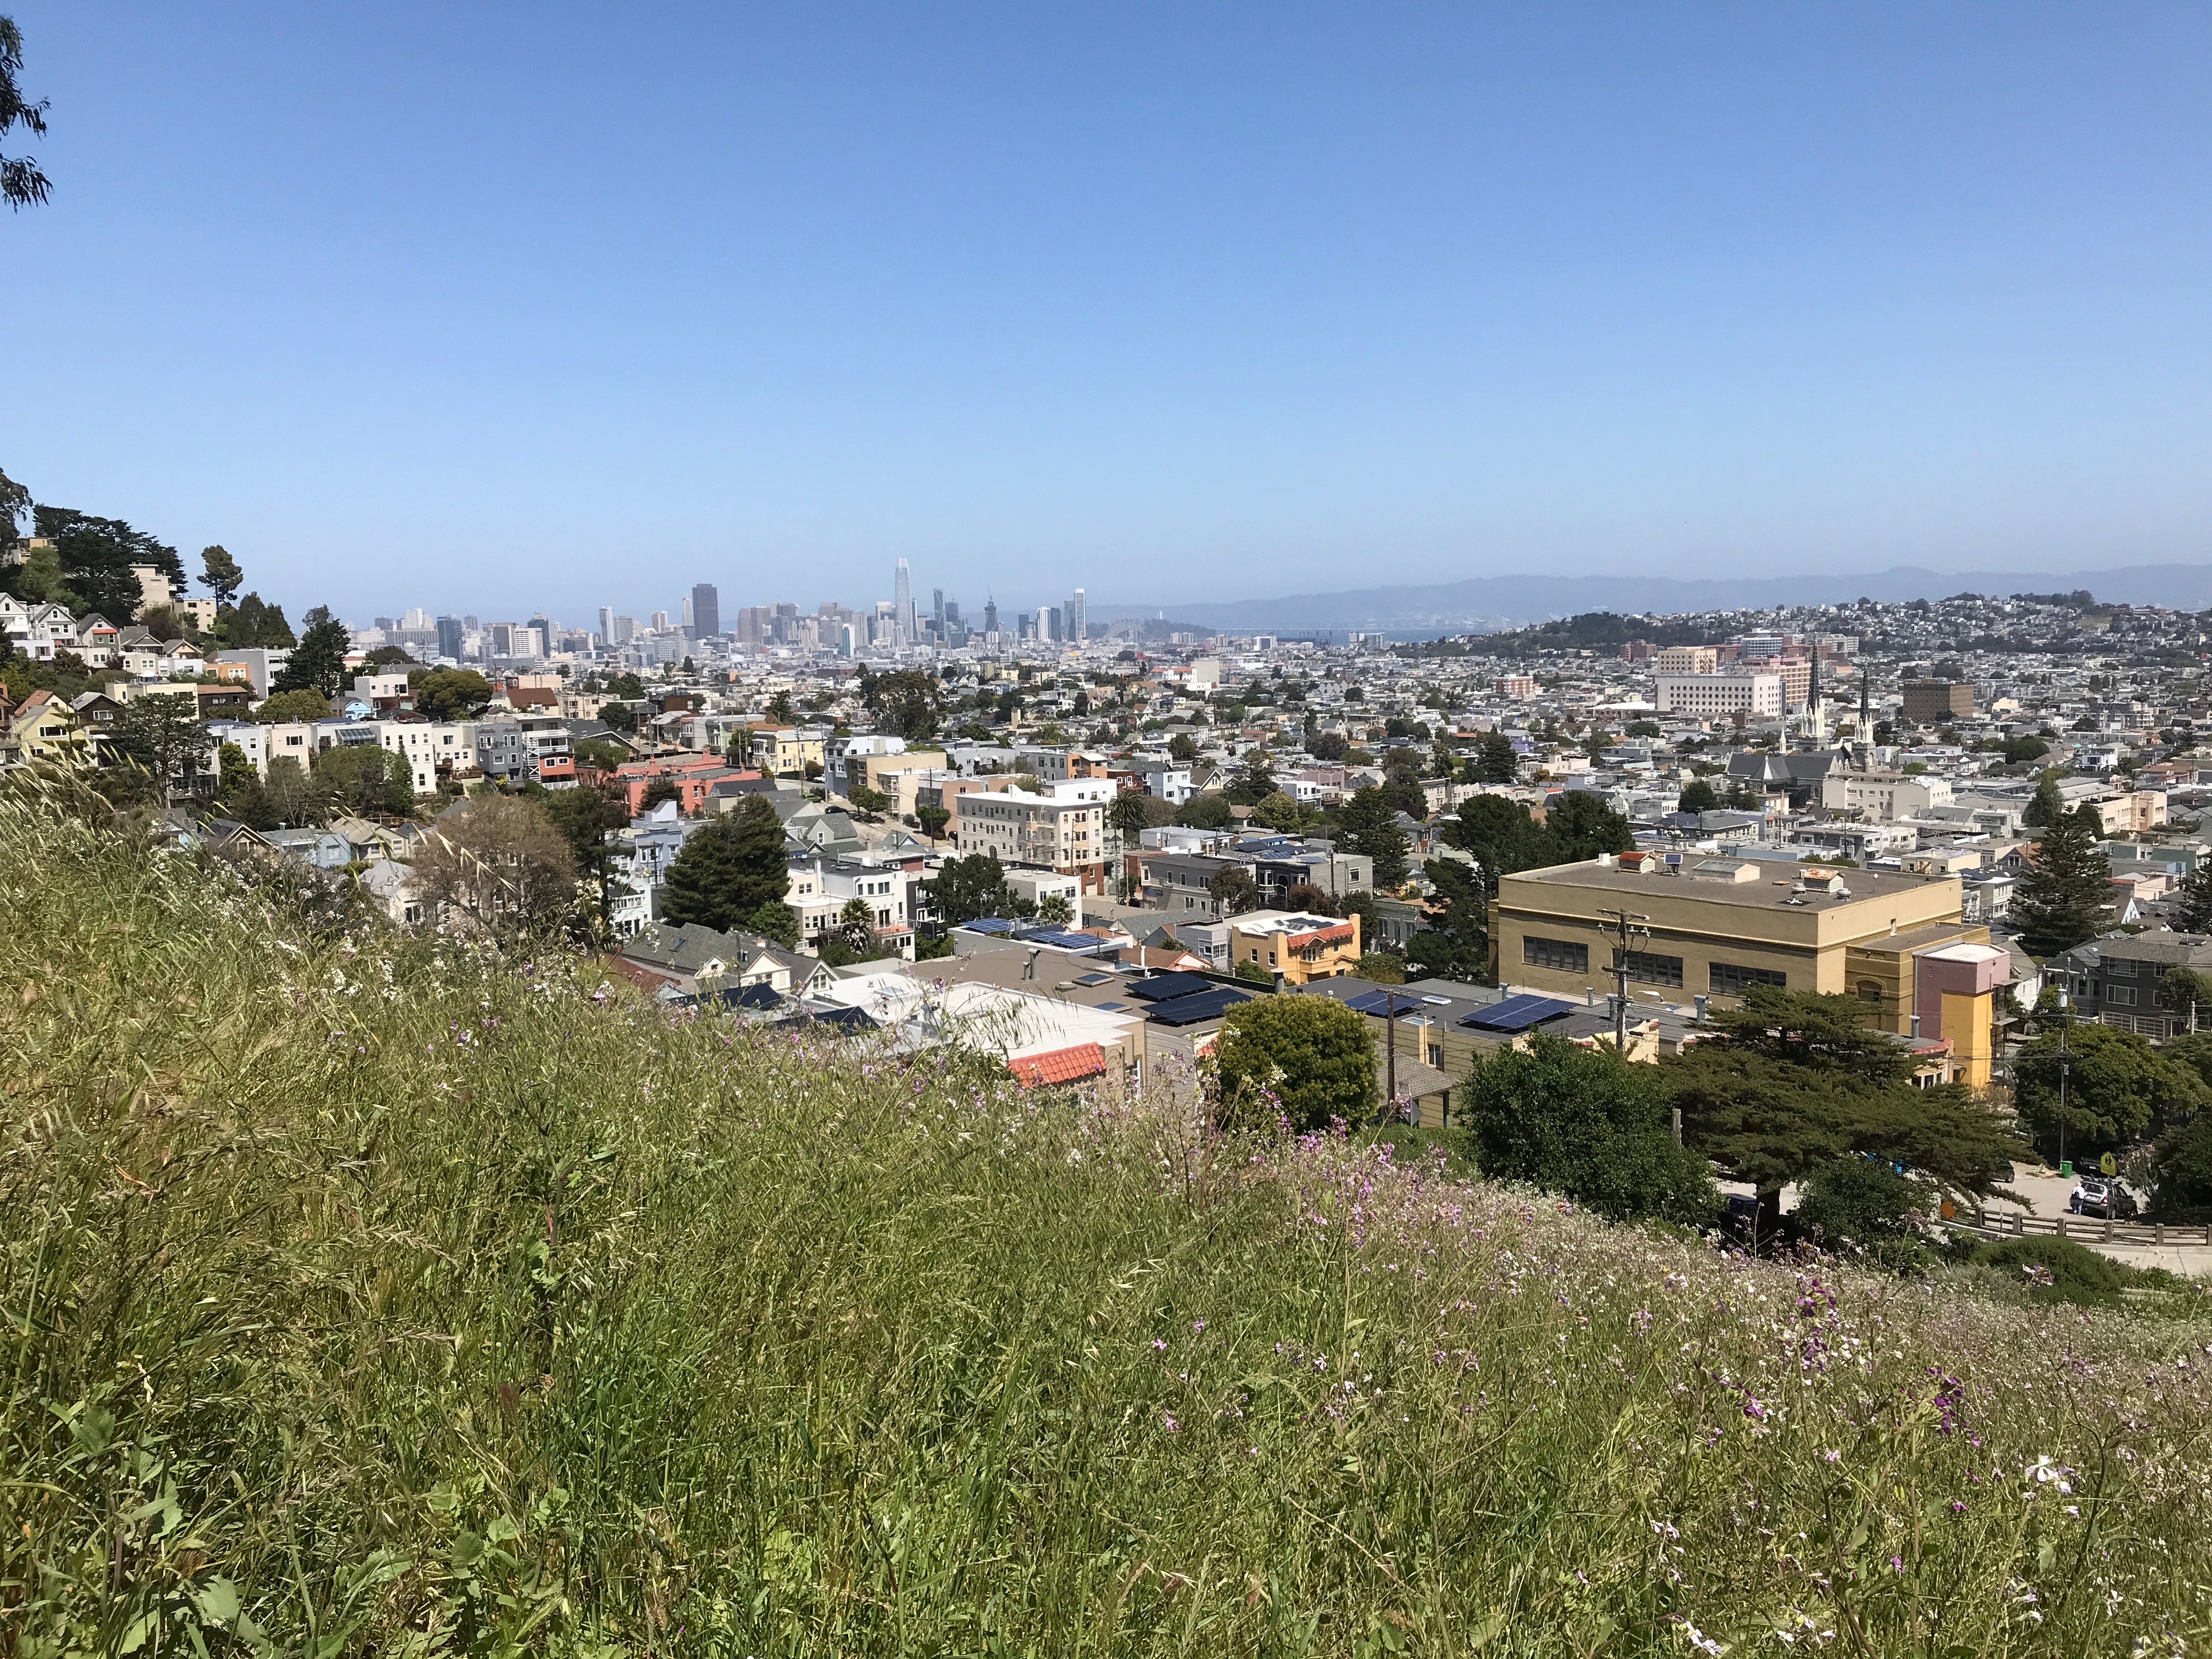 Kid Friendly Hikes in San Francisco - Billy Goat Hill